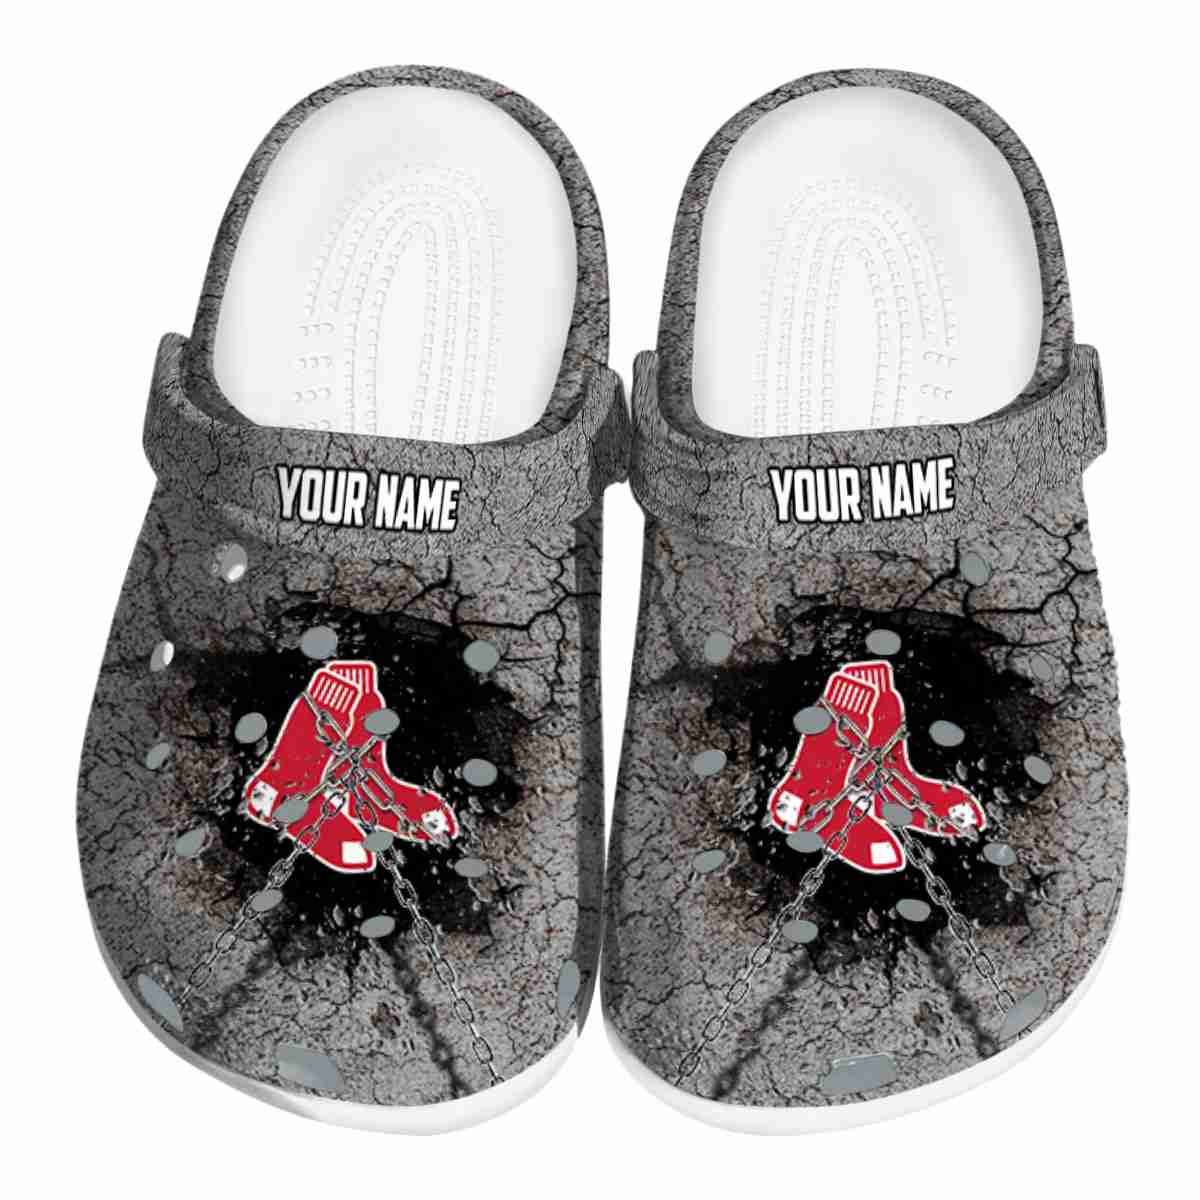 Customized Boston Red Sox Cracked Ground Texture Crocs Best selling